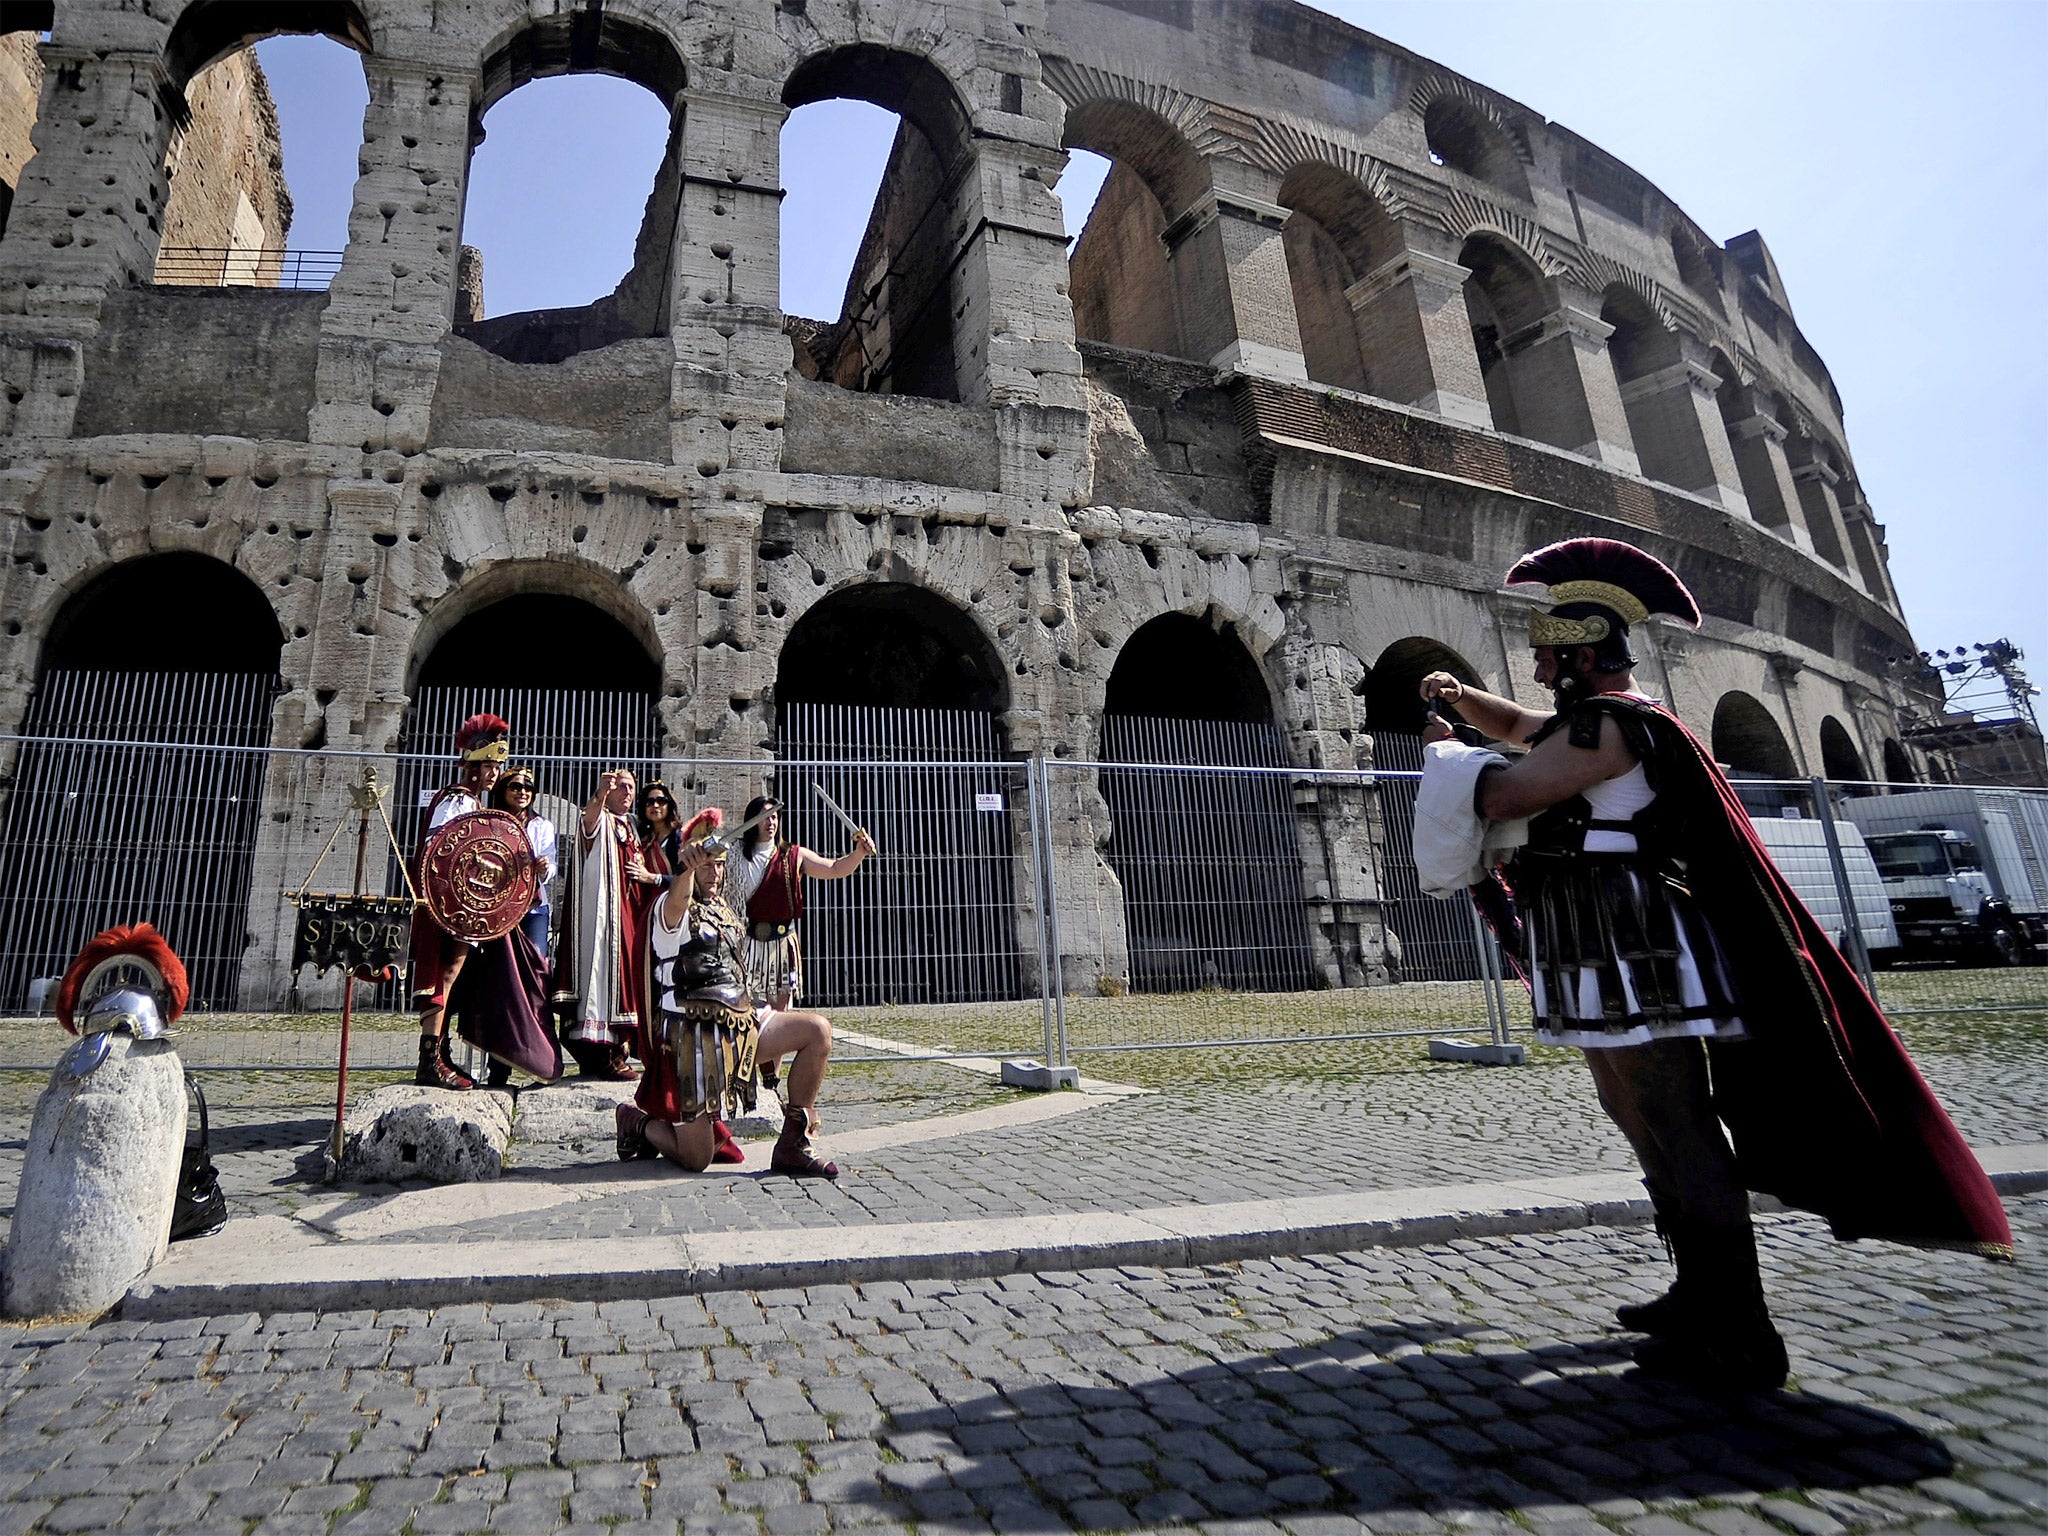 ‘Street artists’ dressed as centurions target tourists outside the Colosseum